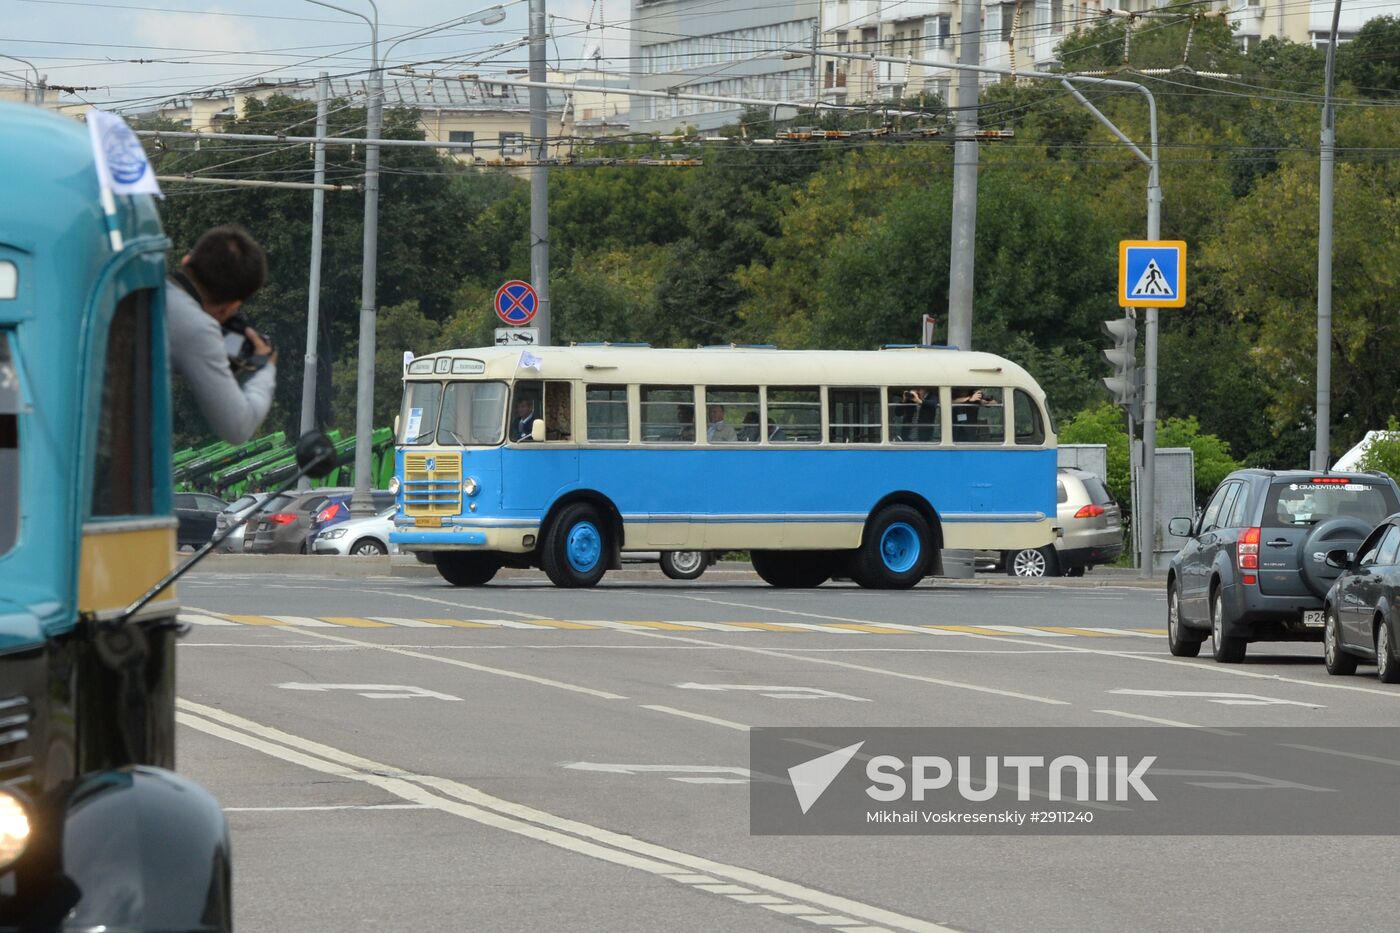 Moscow bus holiday